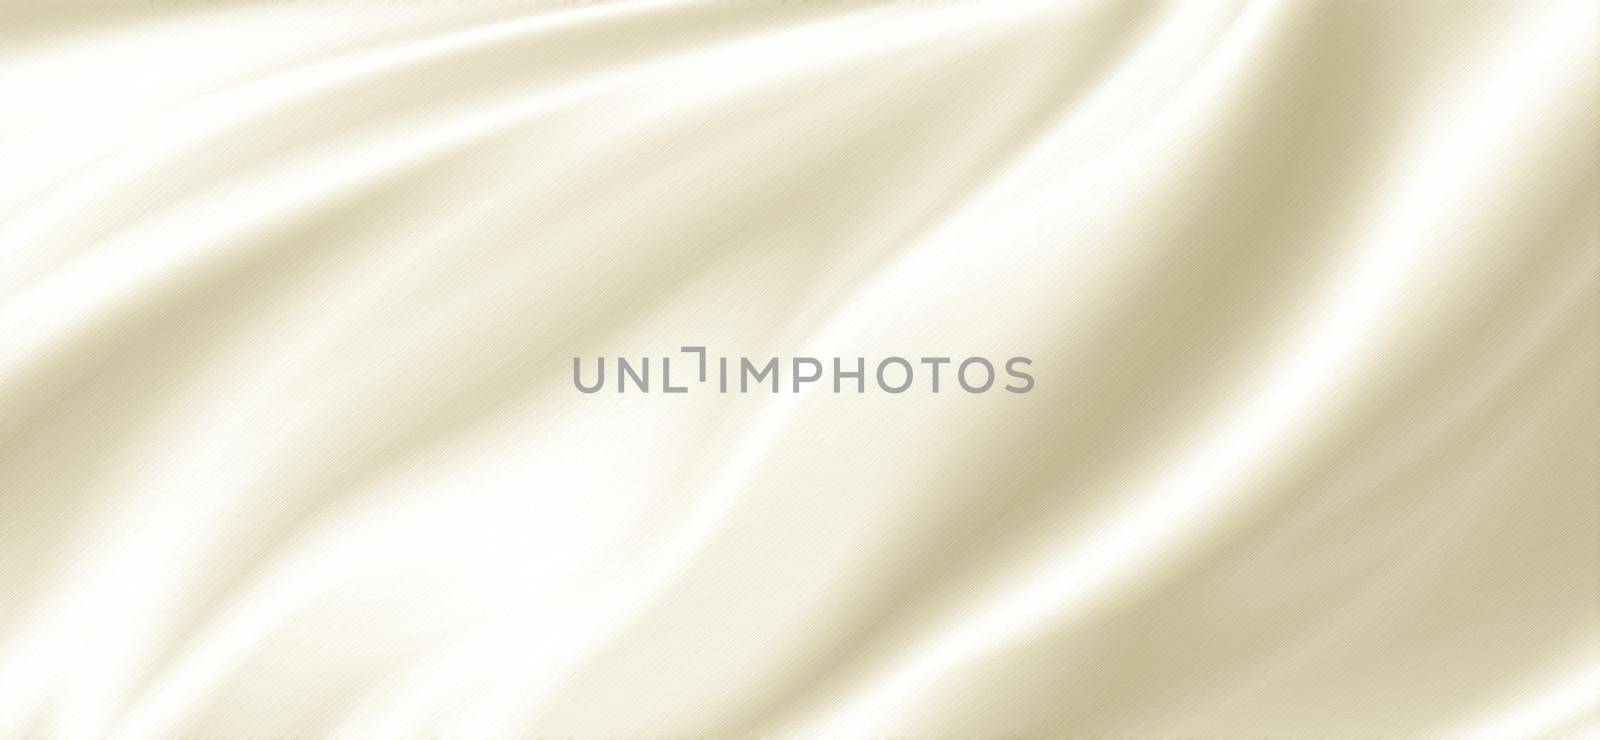 Pearl cloth background with copy space